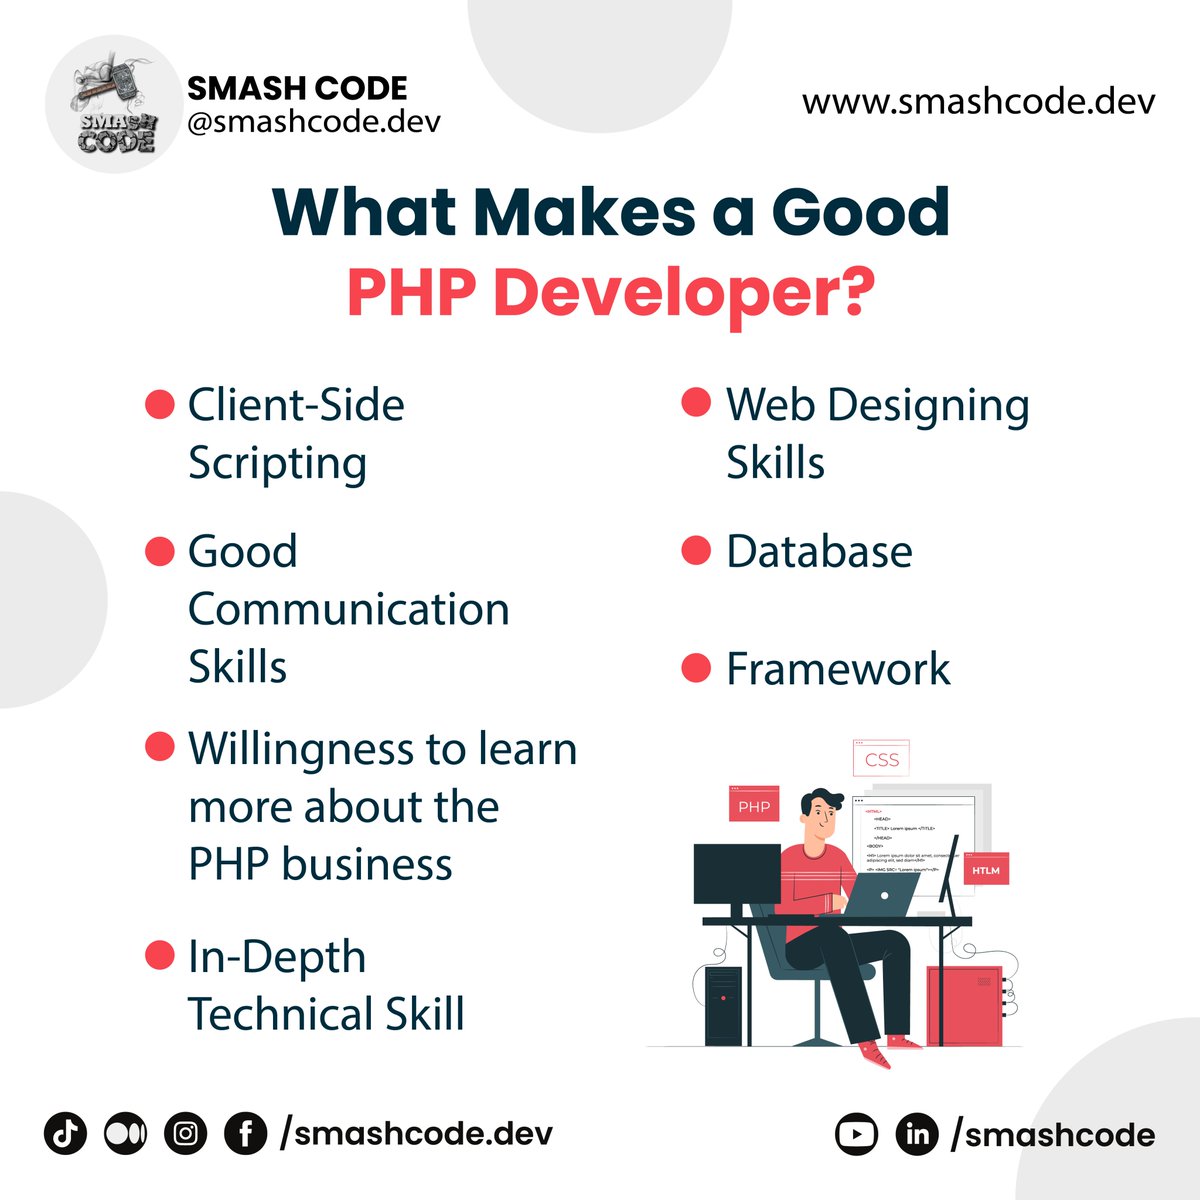 ' What Makes a Good PHP Developer? '
Web link in the first comment...
#smashcode #letsconnect #phpdeveloper #php #phpchallenge #phpagency #phproperties #onlineearningskill16 #WebDeveloper #WebDesign #webdesigning #onlineearningapp #webdesign #webdevelopmentagency #onlineearnings